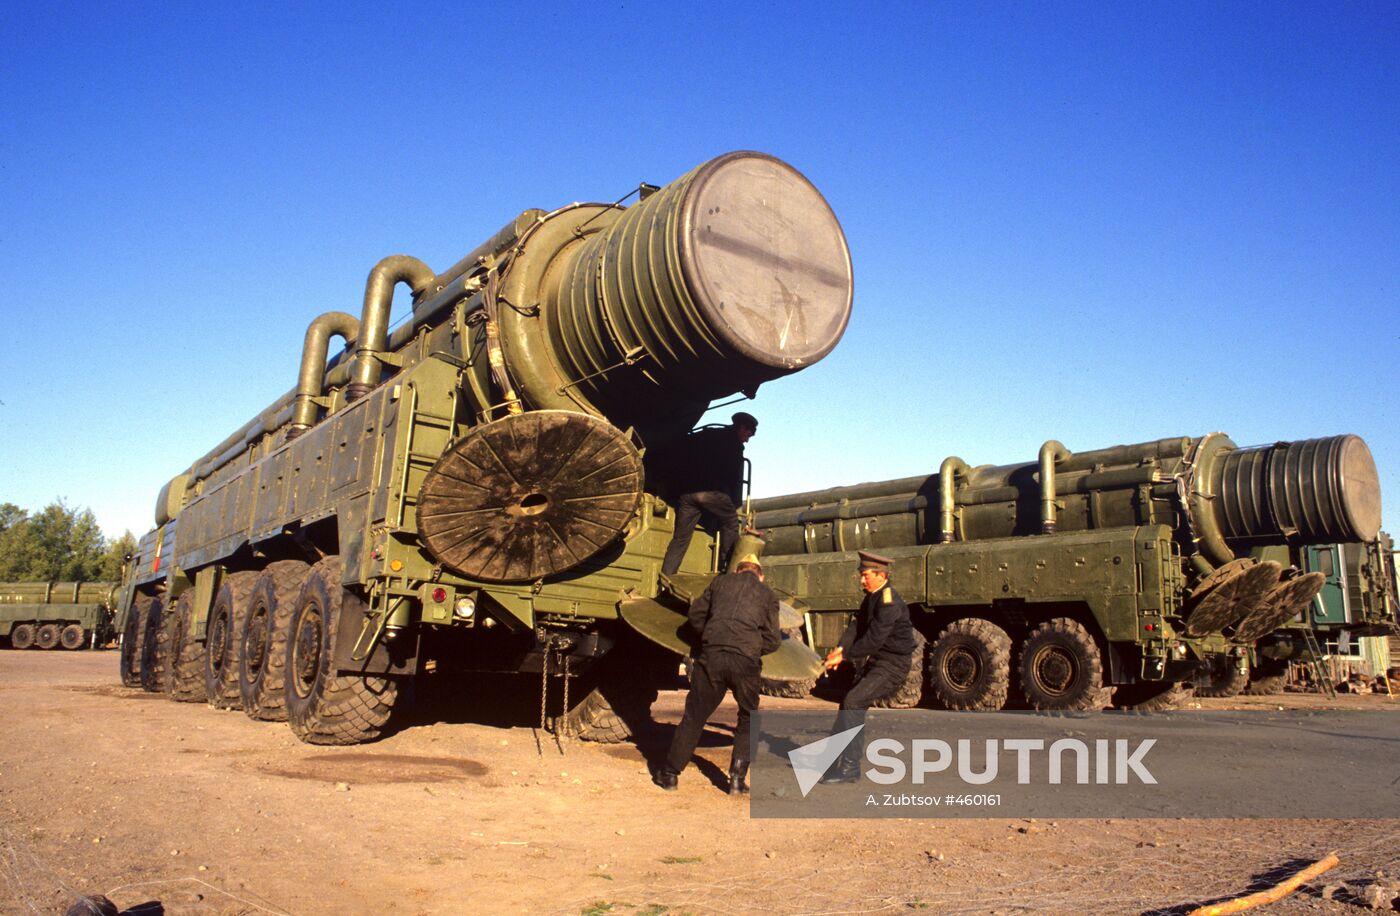 Mobile missile launcher